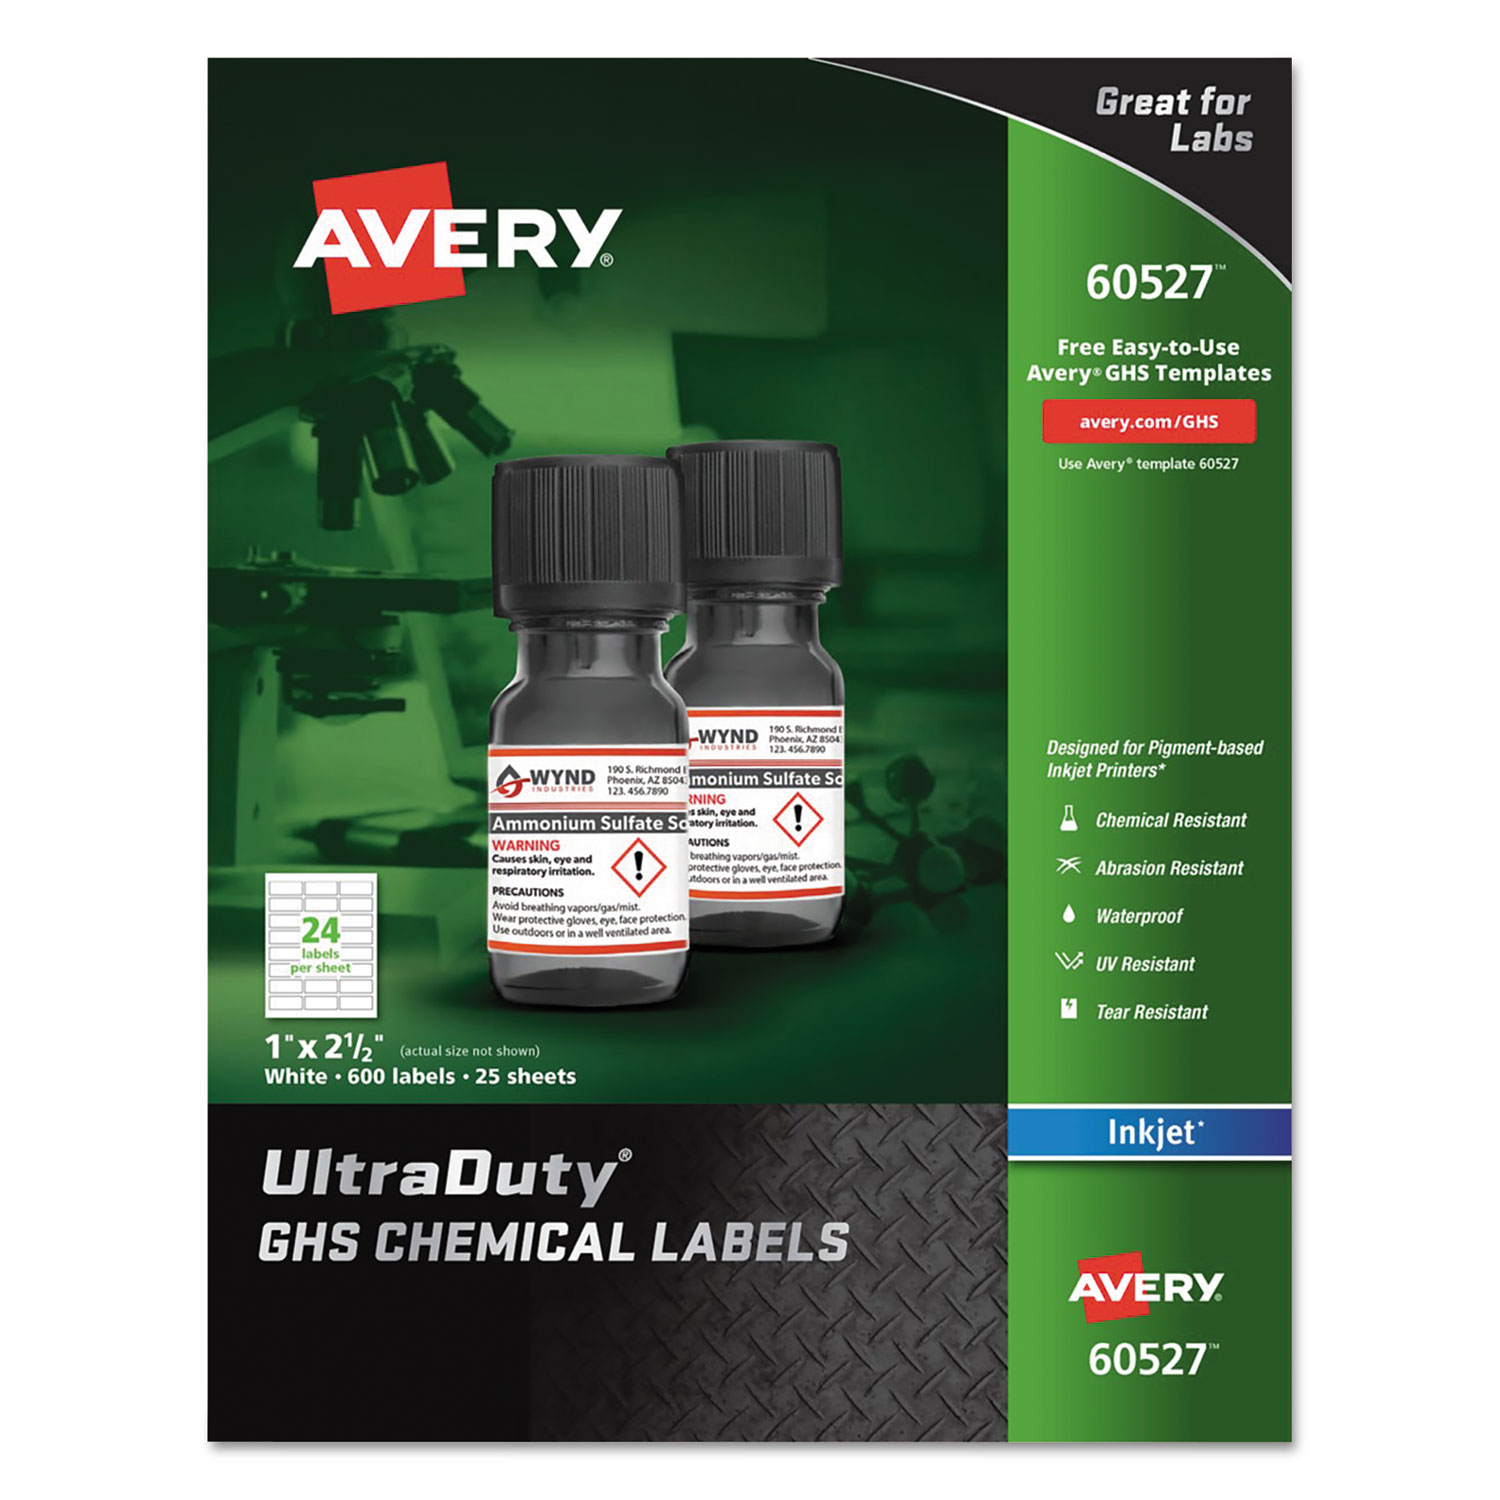  Avery 60527 UltraDuty GHS Chemical Waterproof and UV Resistant Labels, 1 x 2.5, White, 24/Sheet, 25 Sheets/Pack (AVE60527) 